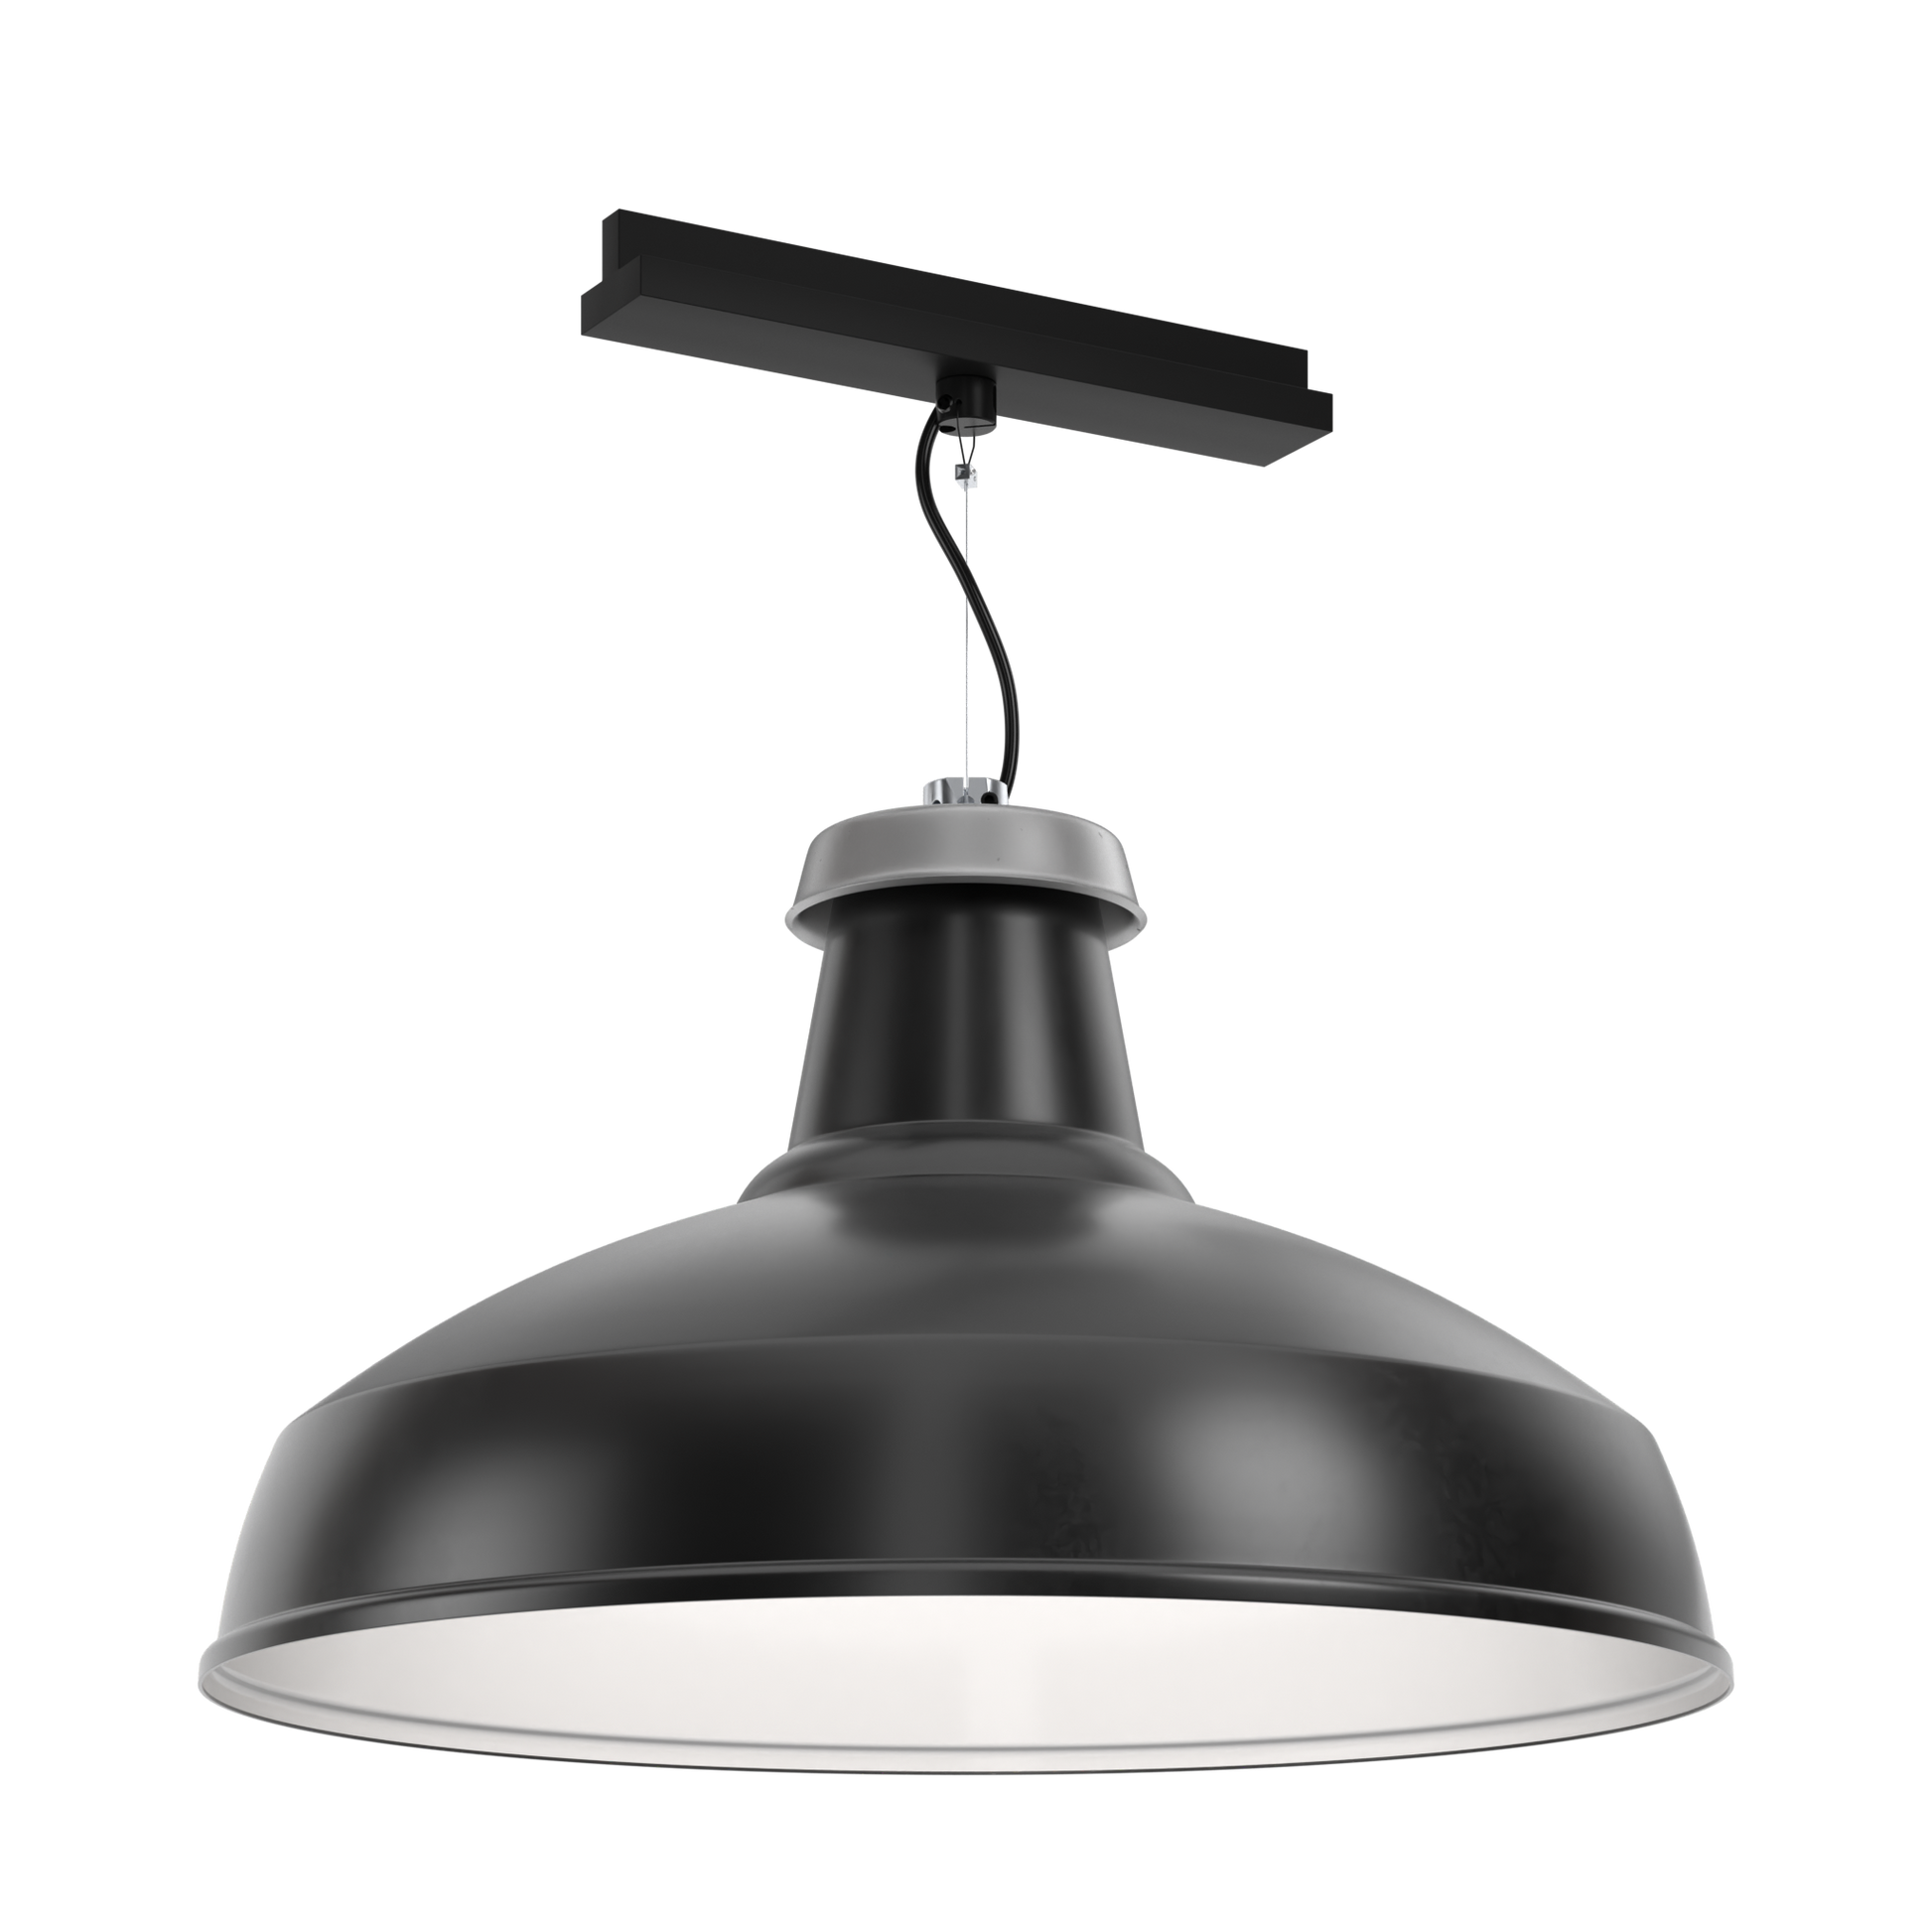 A black architectural XL pendant light that's designed for circular economy, on a track lighting adaptor